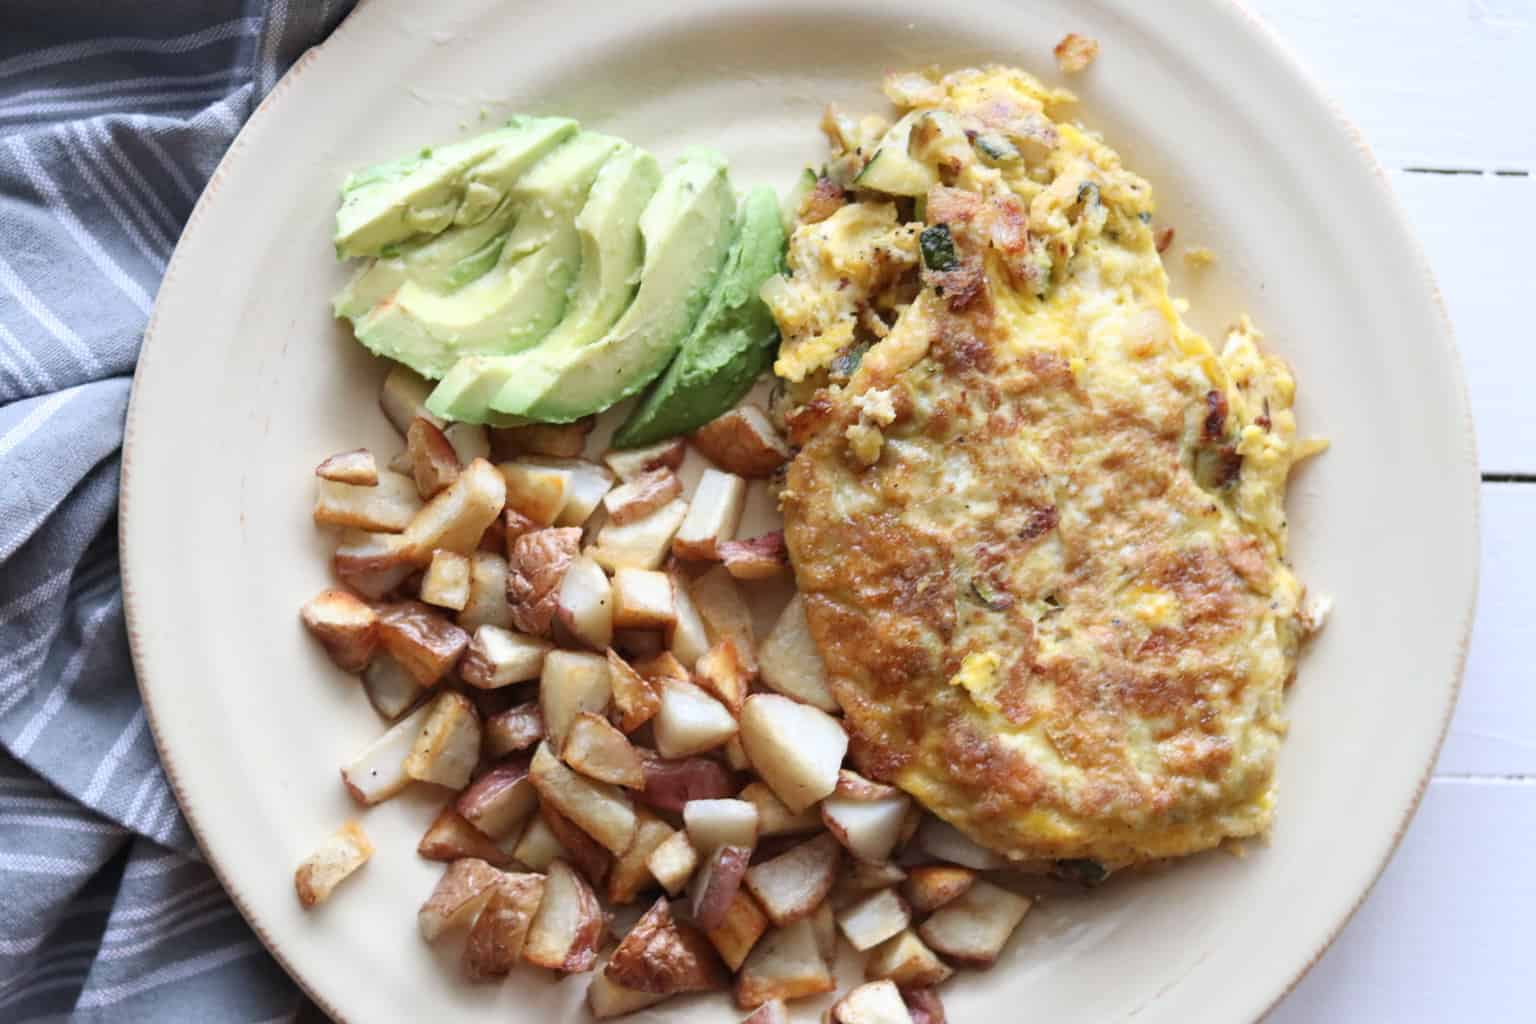 Vegetable omelet served with hash browns, avocados, and sauerkraut.